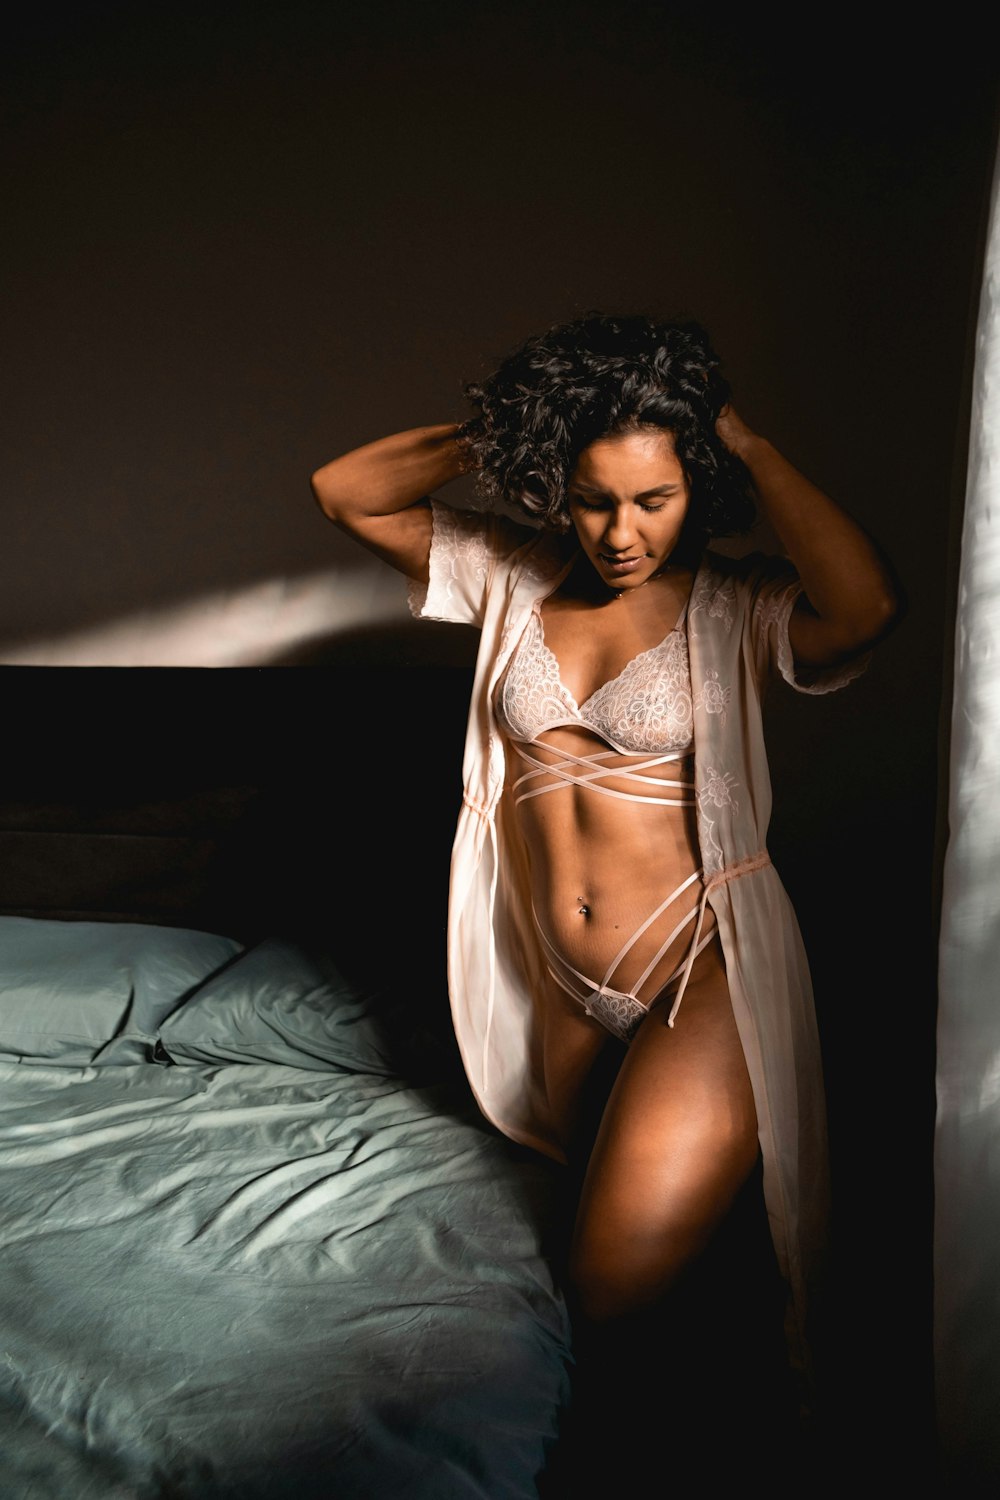 a woman in lingerie posing on a bed